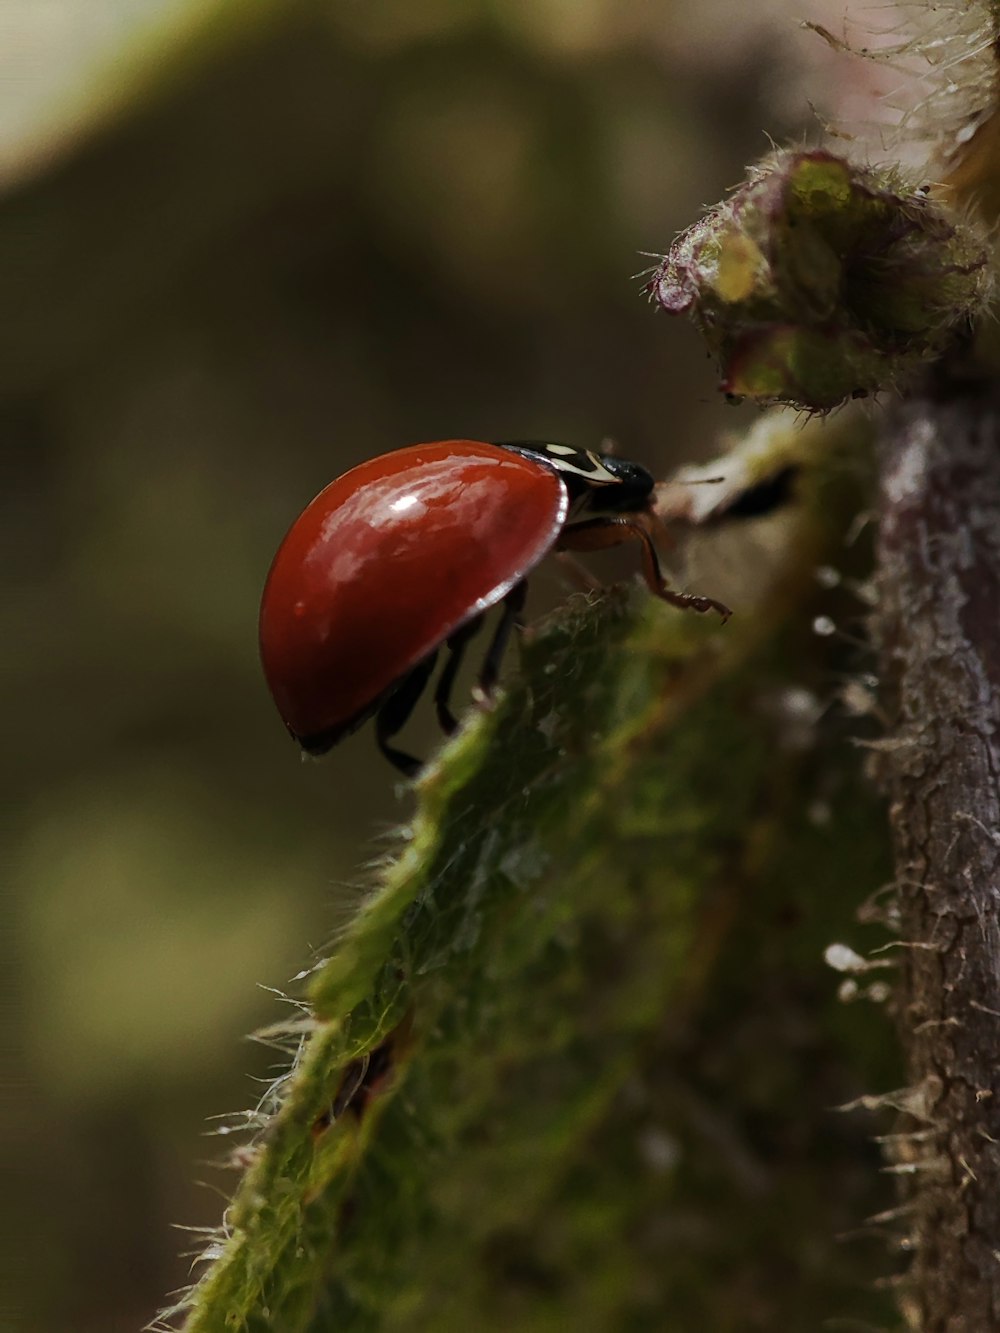 a close up of a red and black bug on a leaf